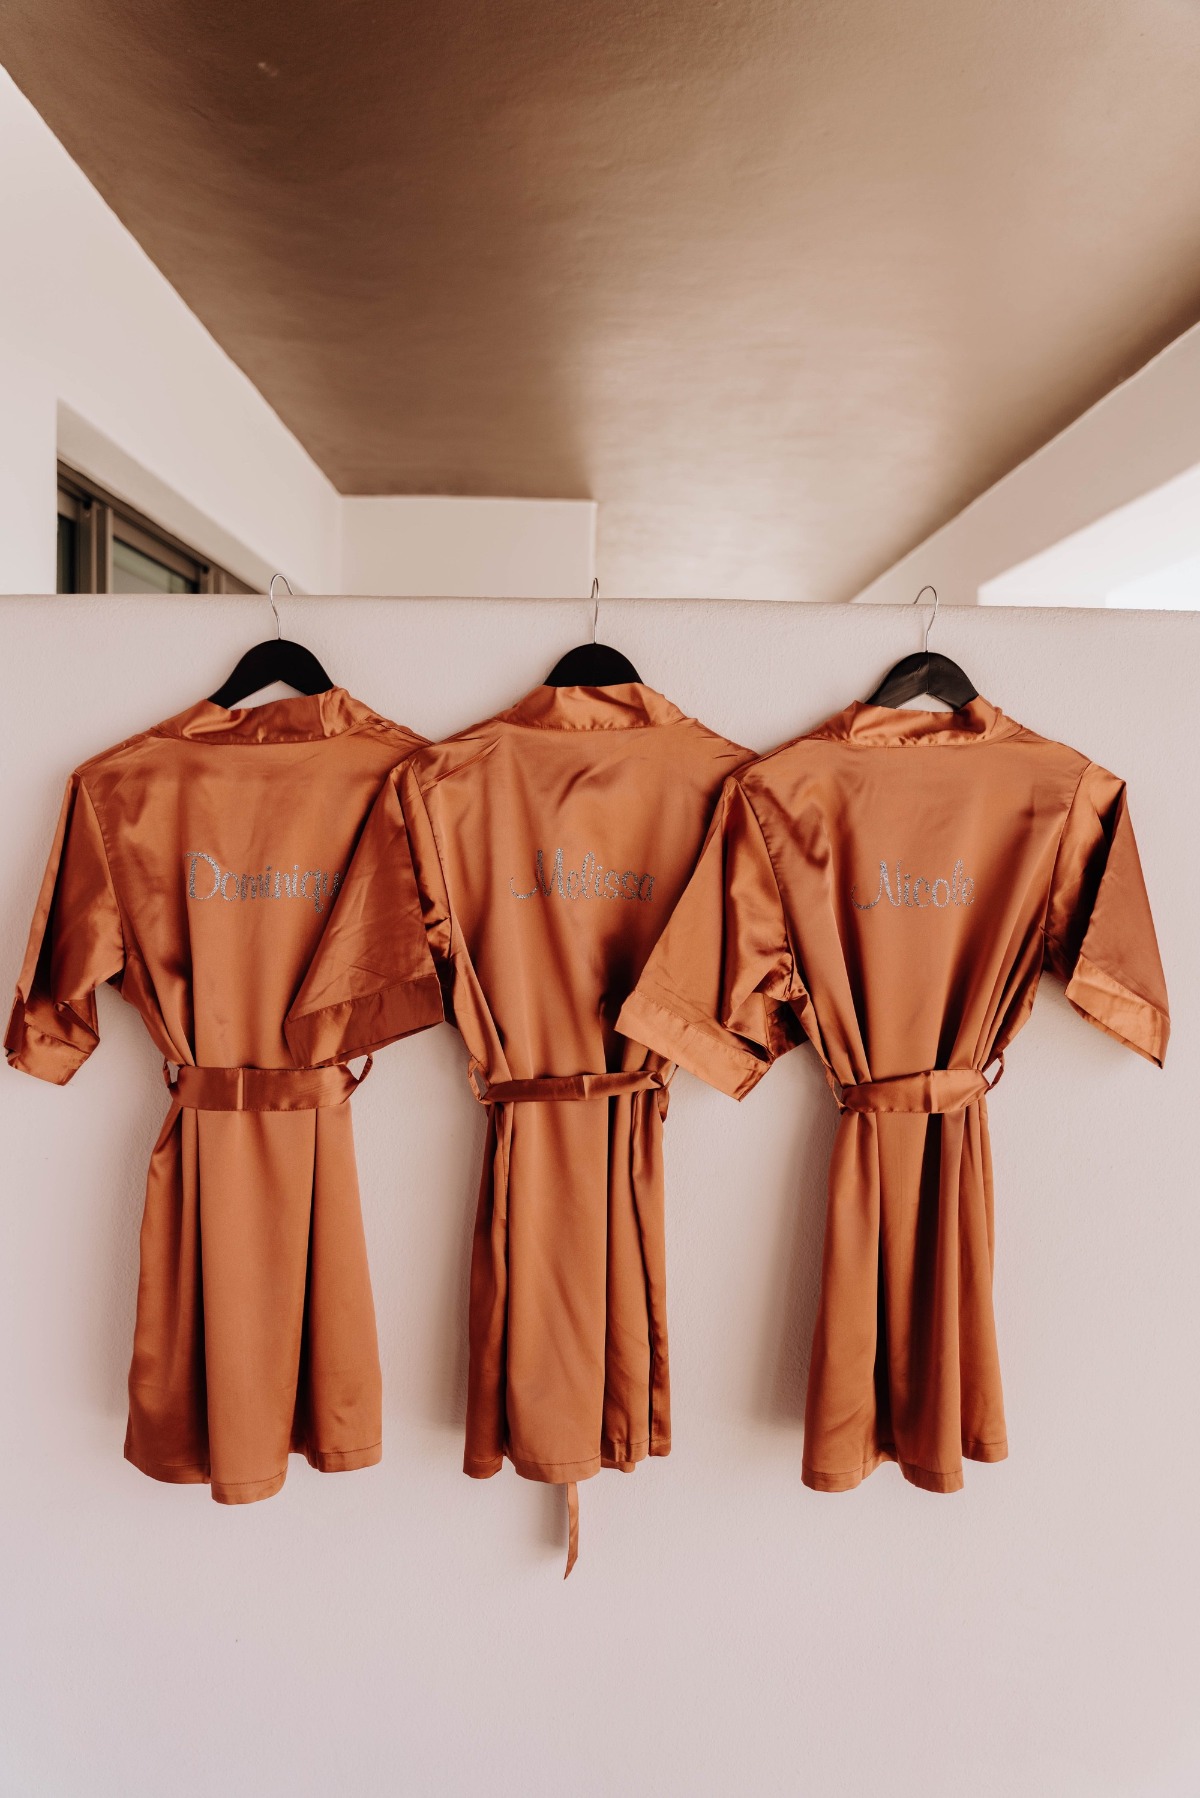 personalized terra cotta bridesmaid robes with their names in glitter.